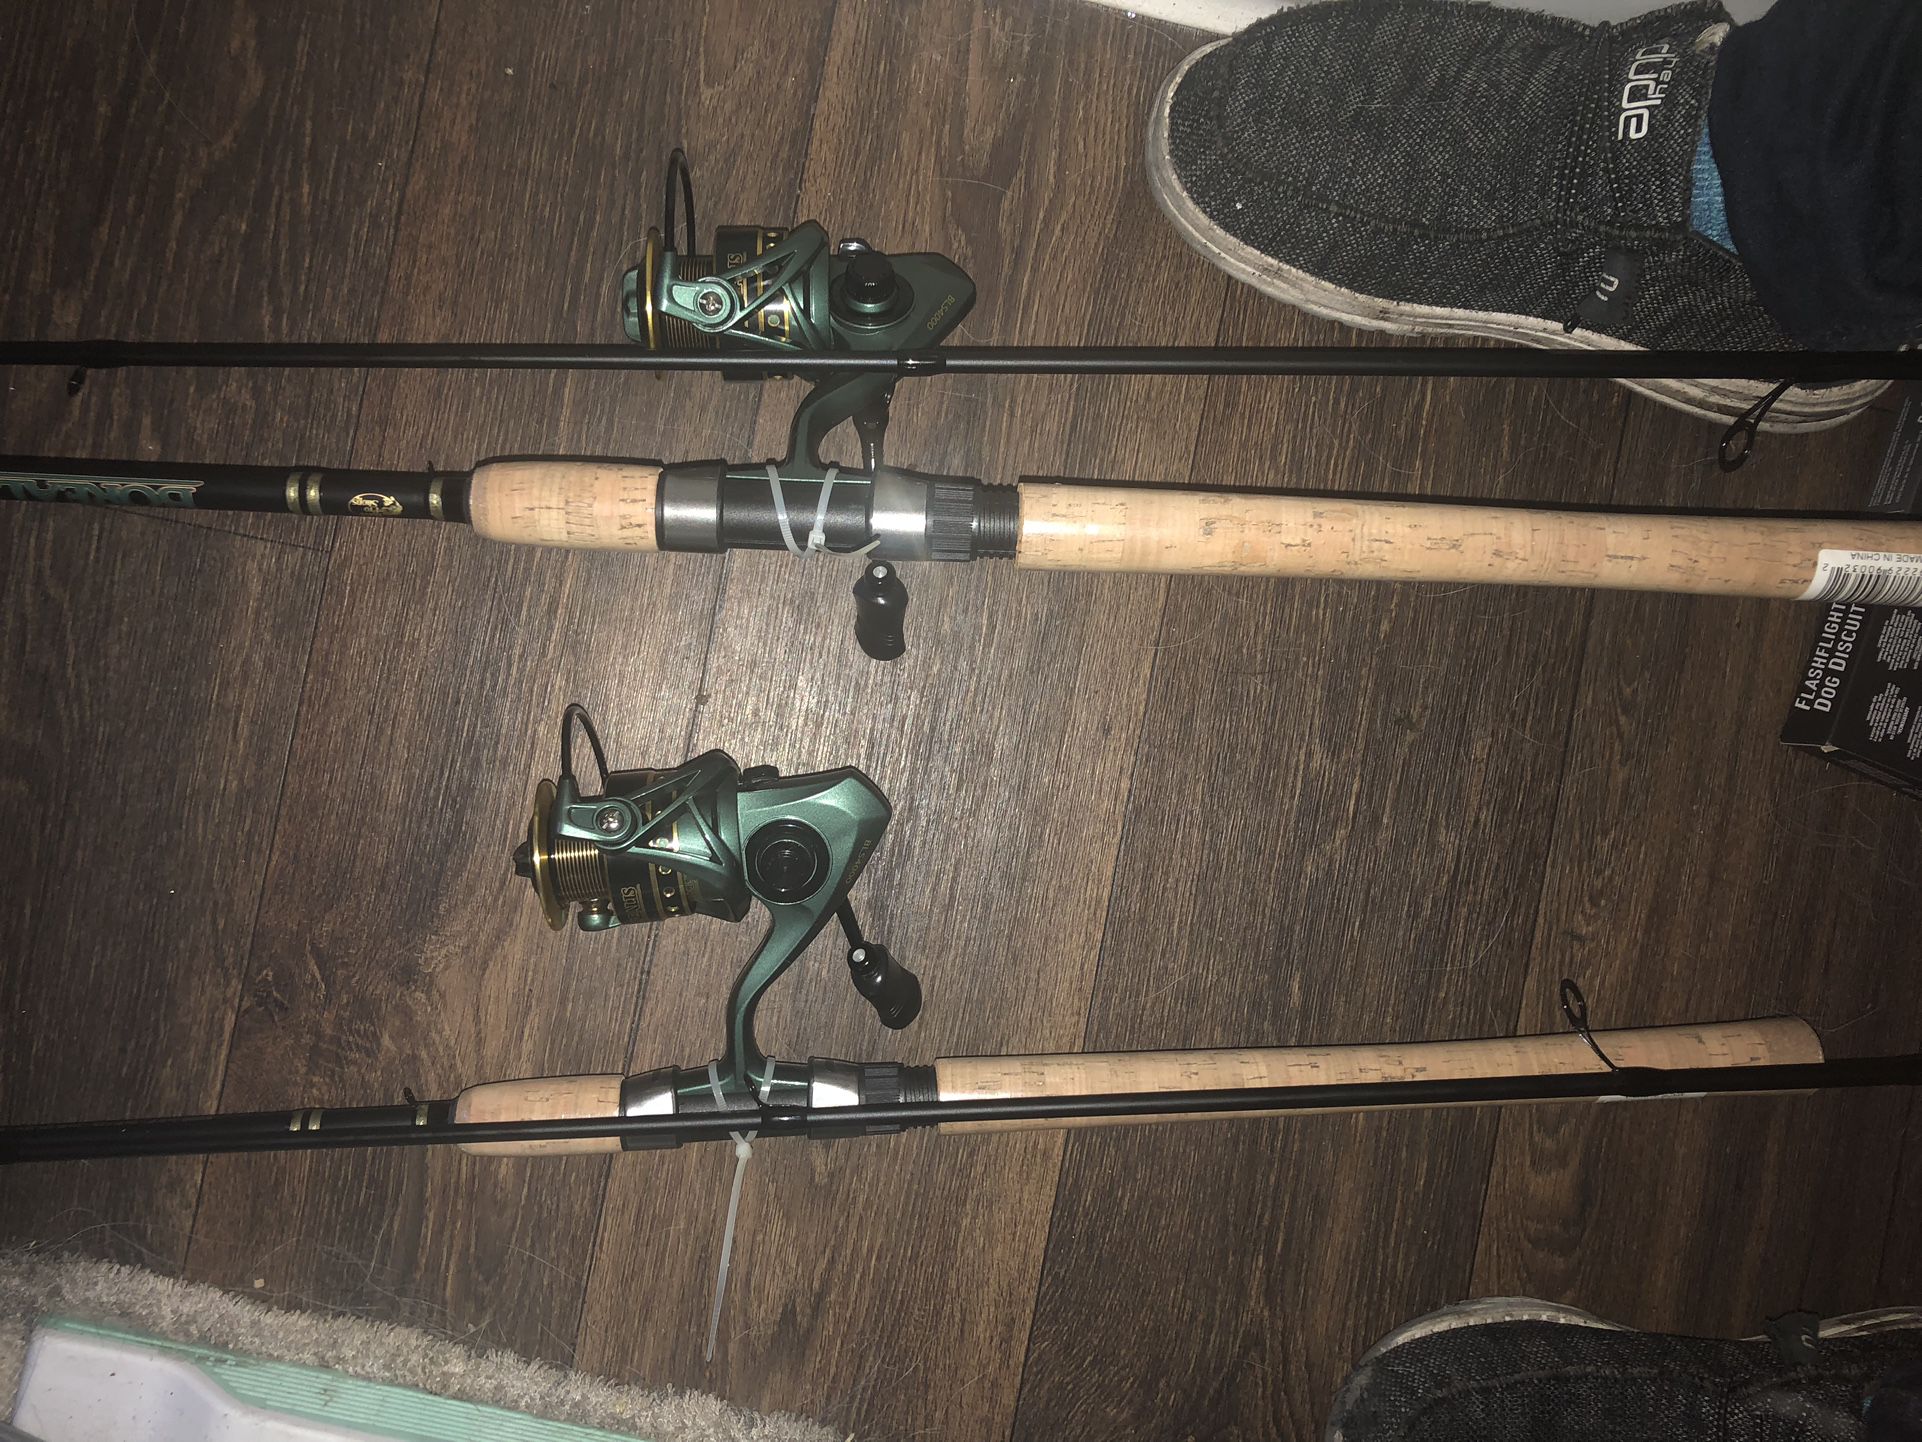 Fishing Pole’s brand New Never Used